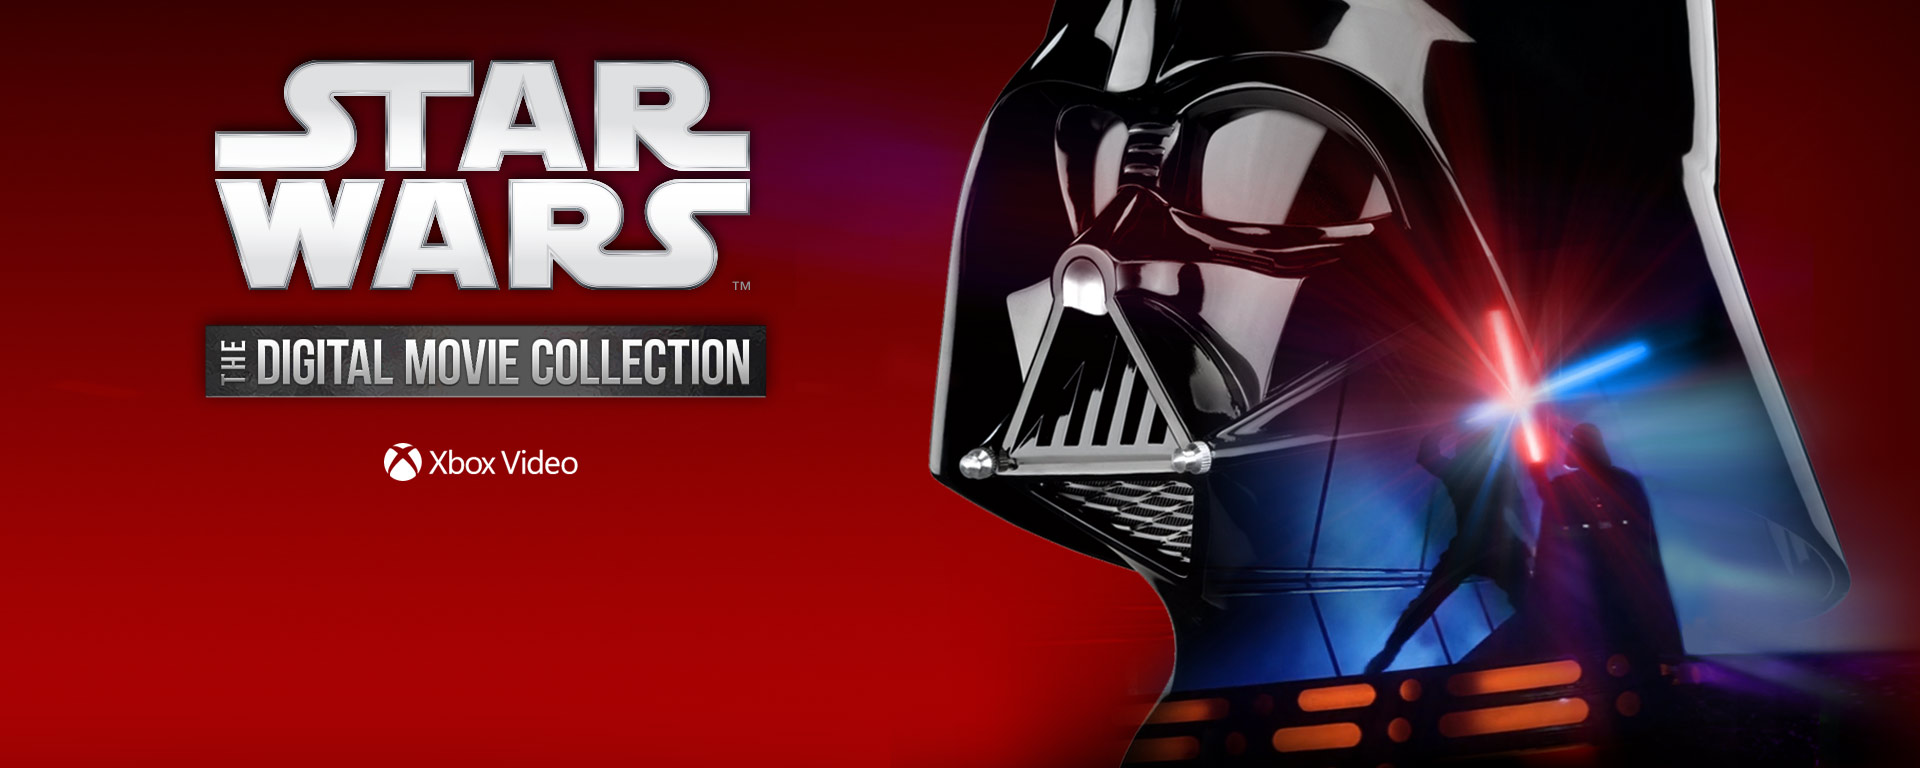 Star Wars Digital Movie Collection - Price & Availability Guide